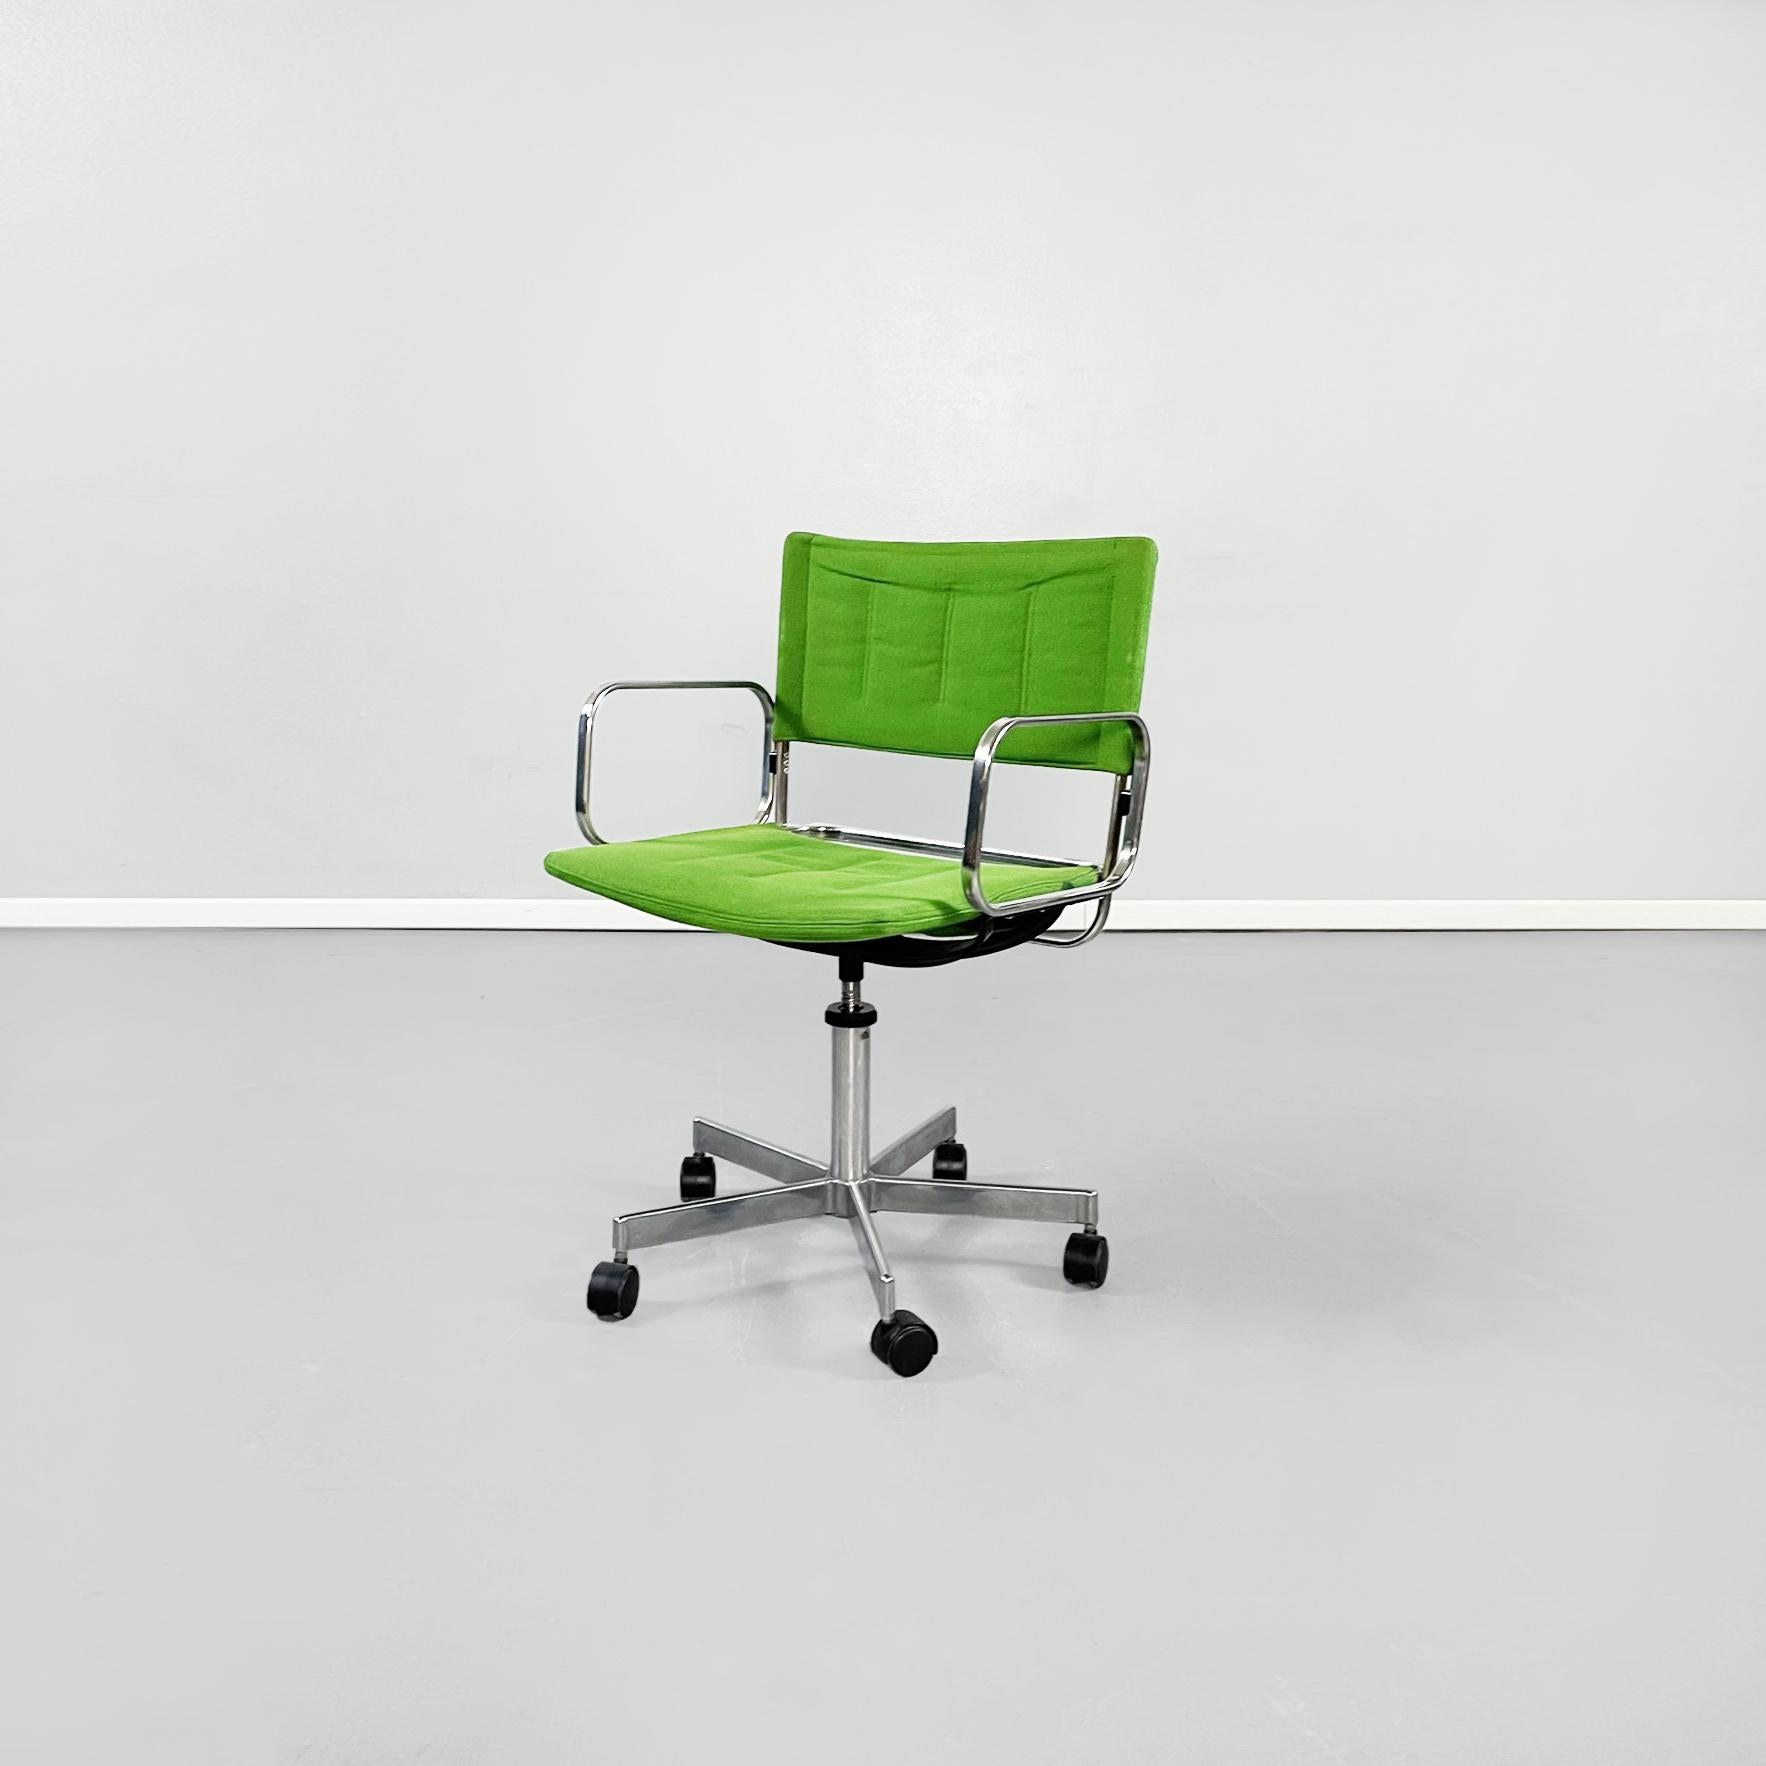 Italian mid-century Green fabric and steel office chairs by Zanotta, 1980s
Set of 4 office chairs with rectangular seat and back in bright green fabric. The structure is in tubular steel. The base has 5 spokes with wheels. Original